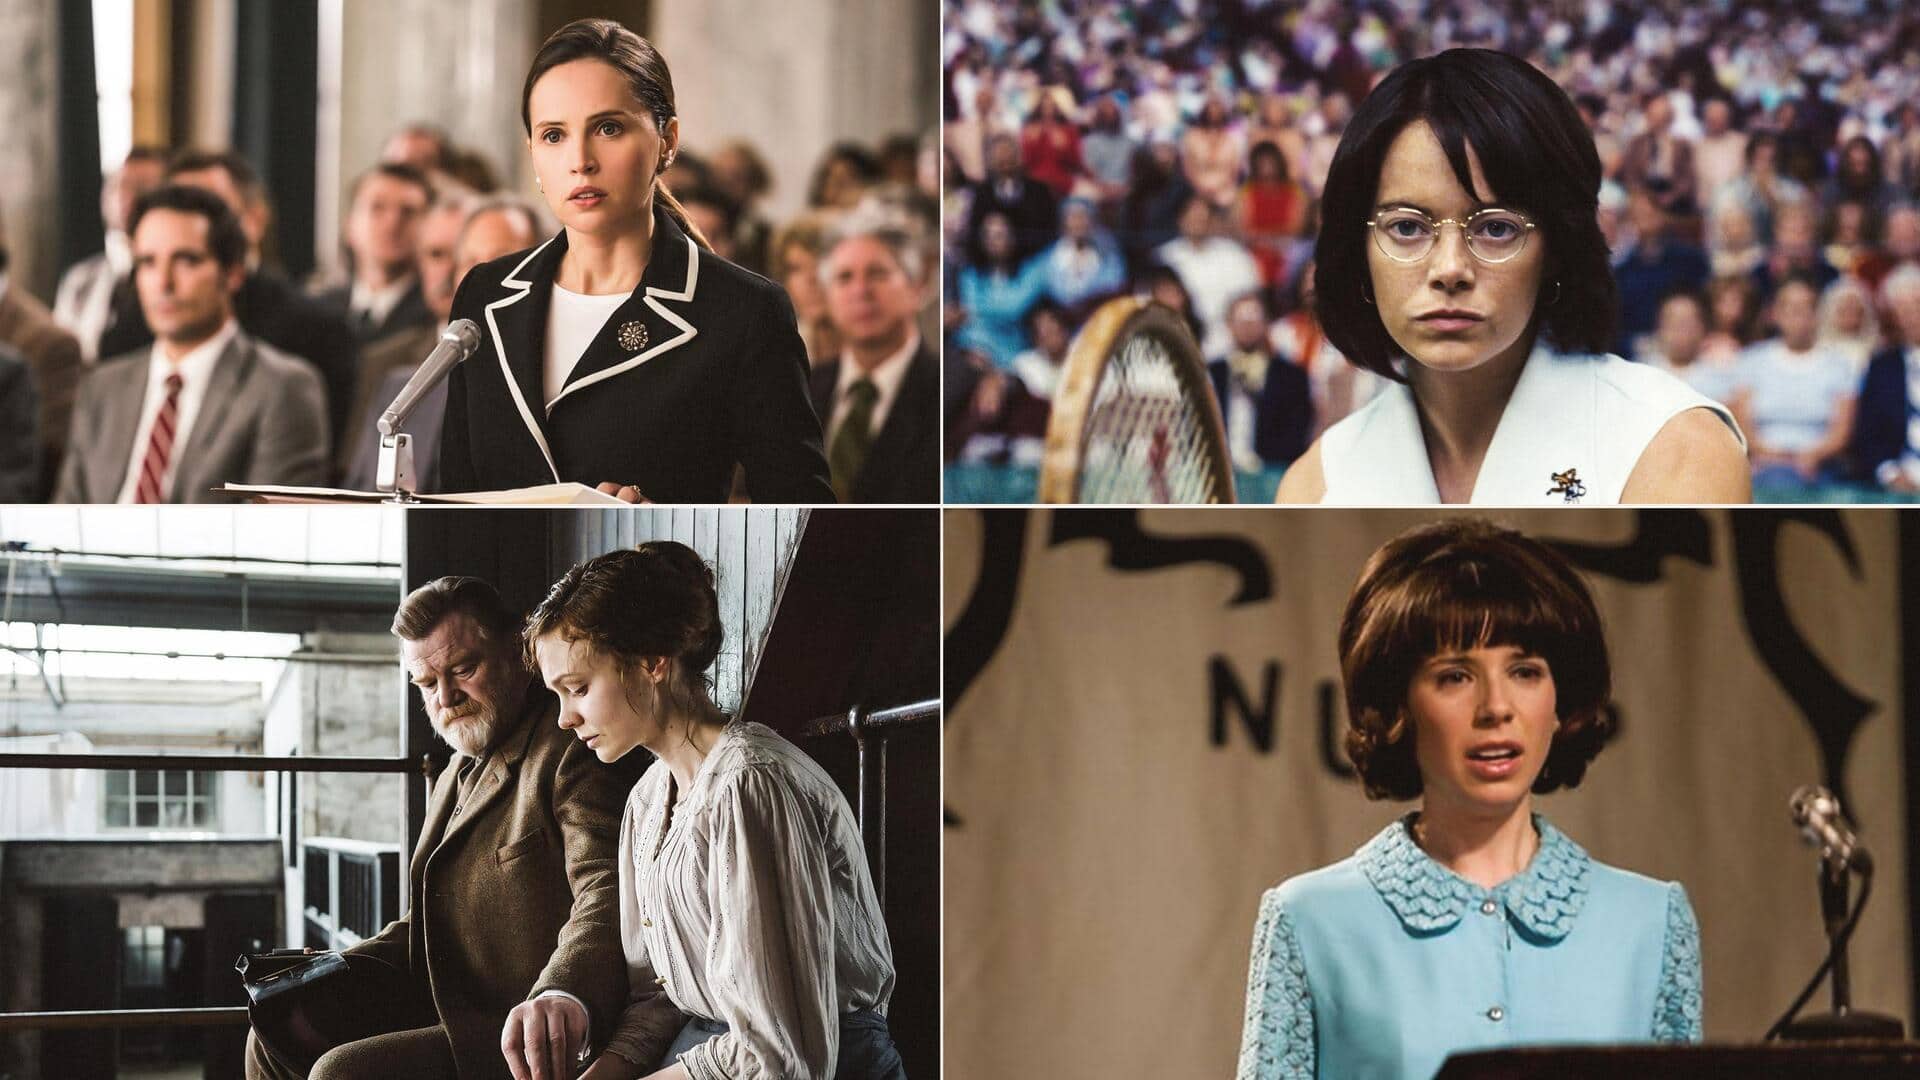 'Suffragette' to 'Battle of Sexes': Hollywood movies on women's rights